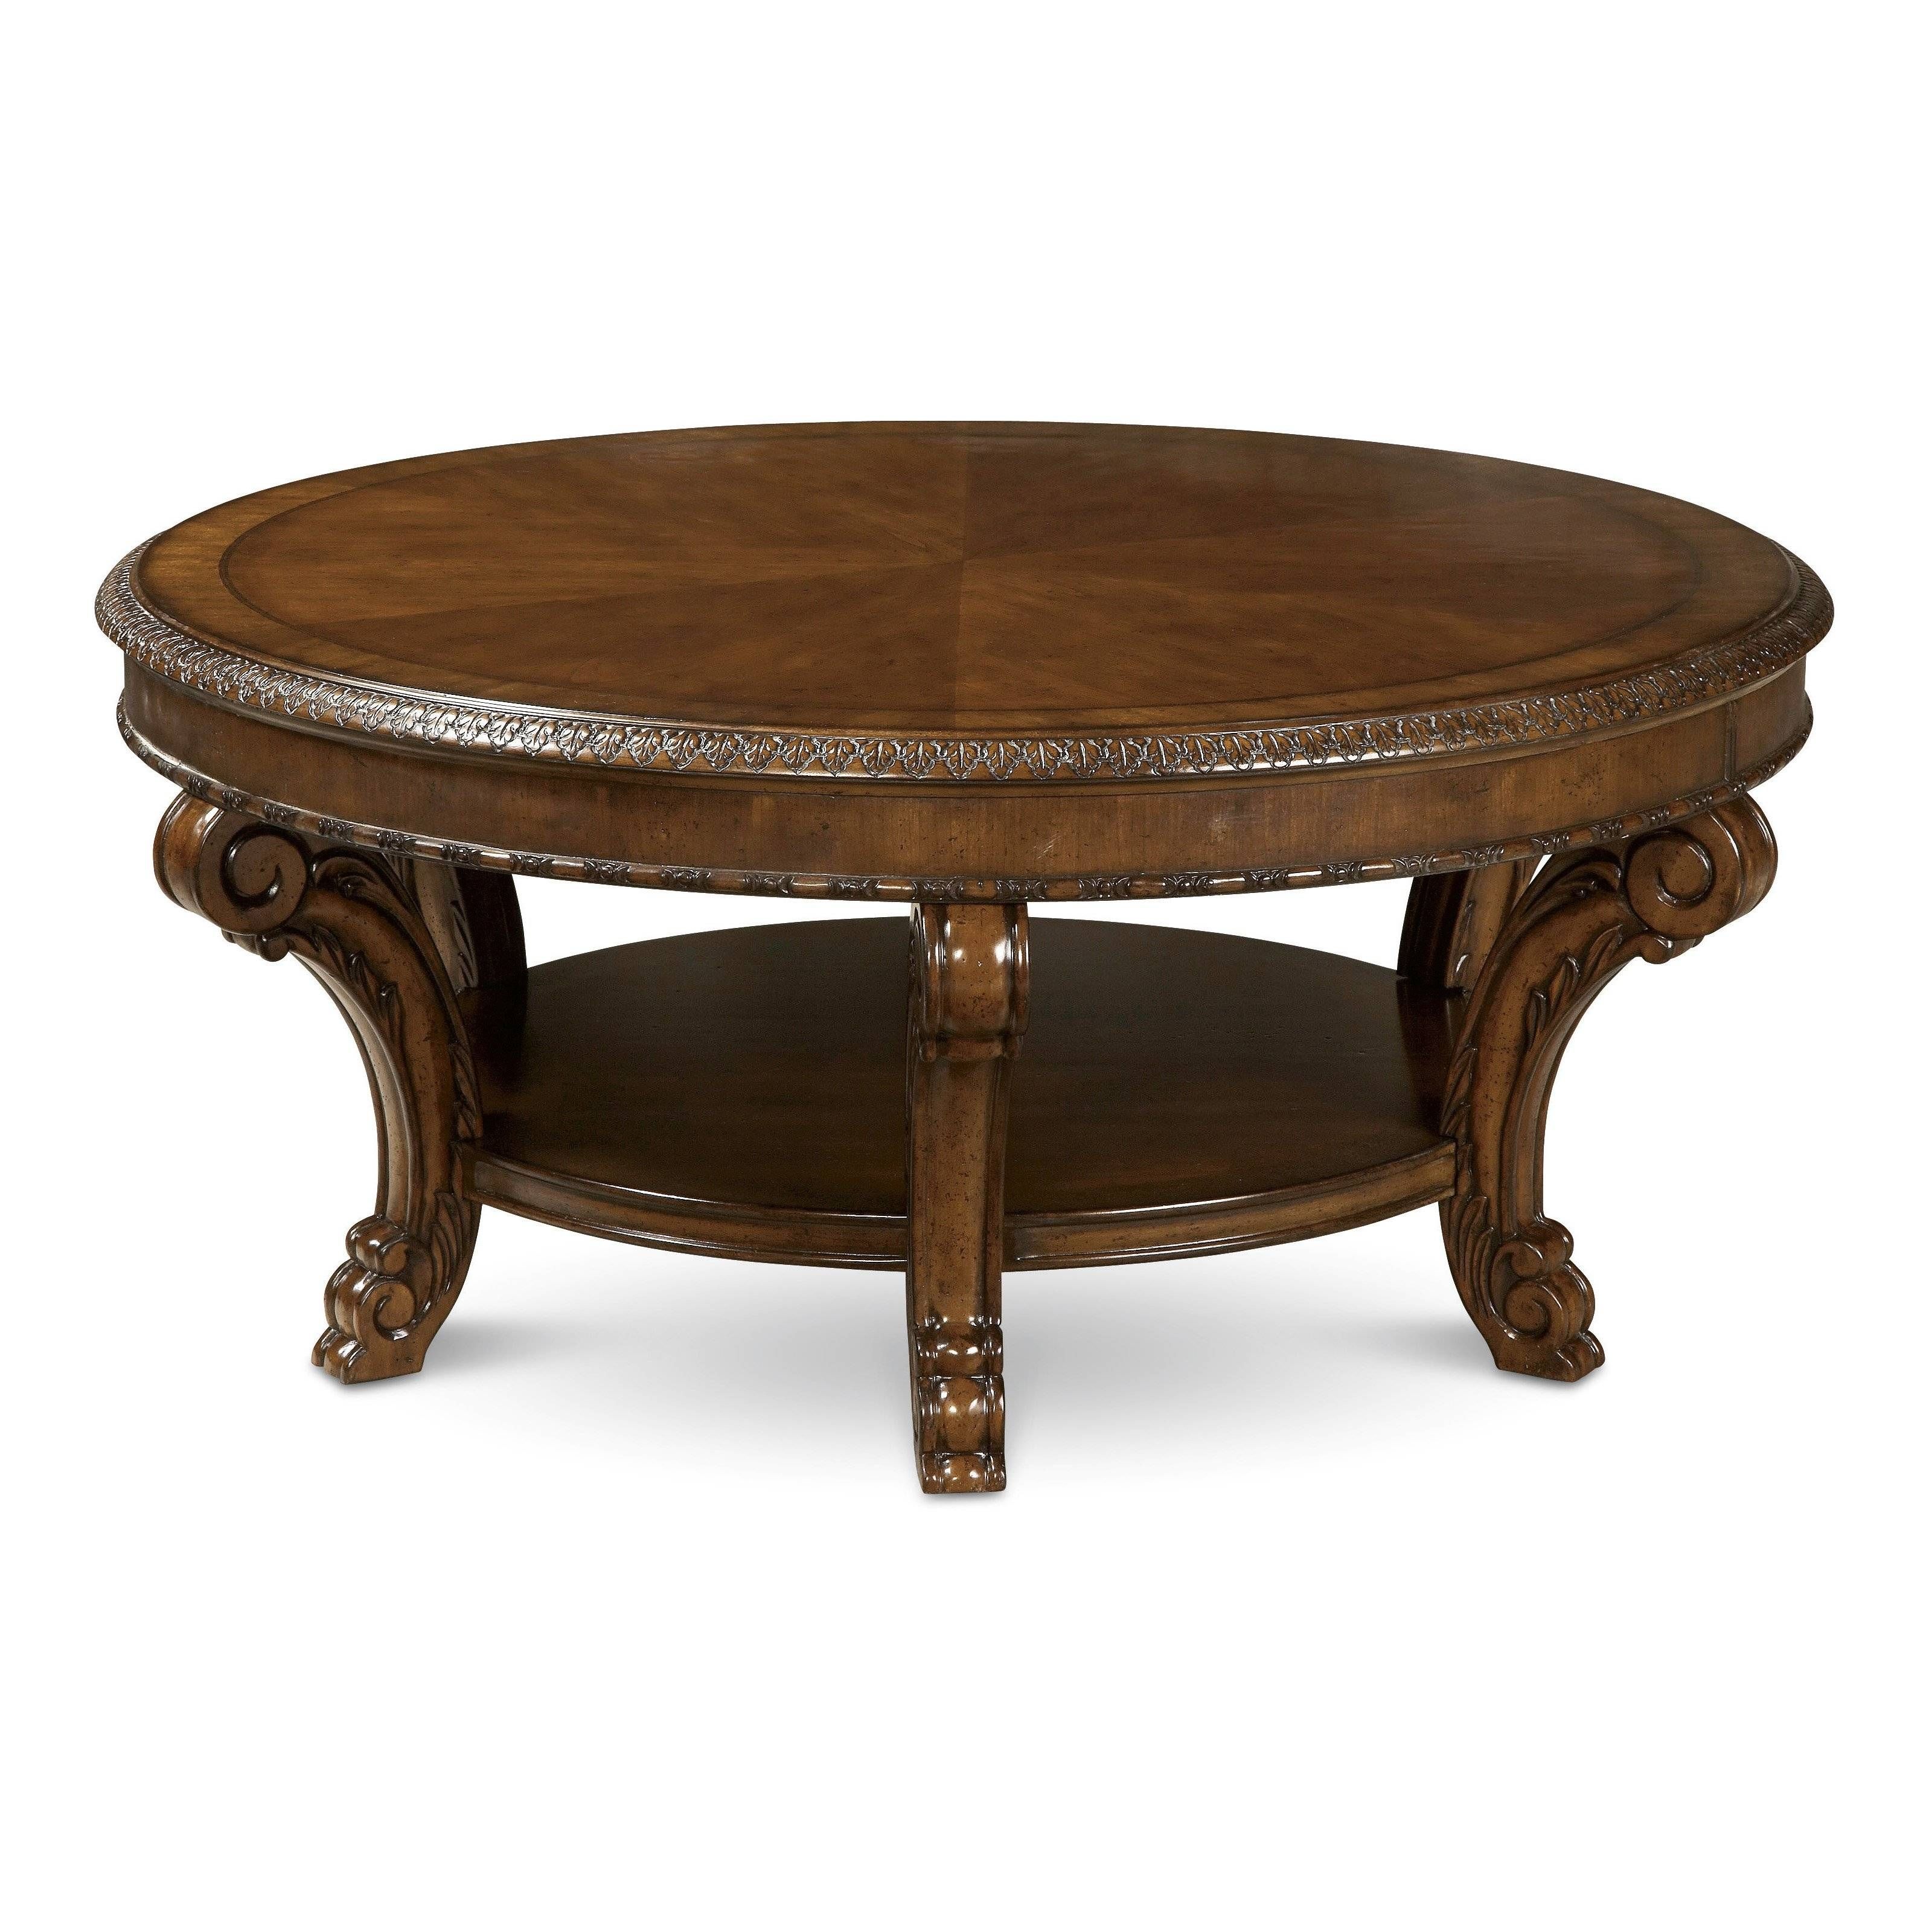 30 Inspirations of Dark Wood Round Coffee Tables